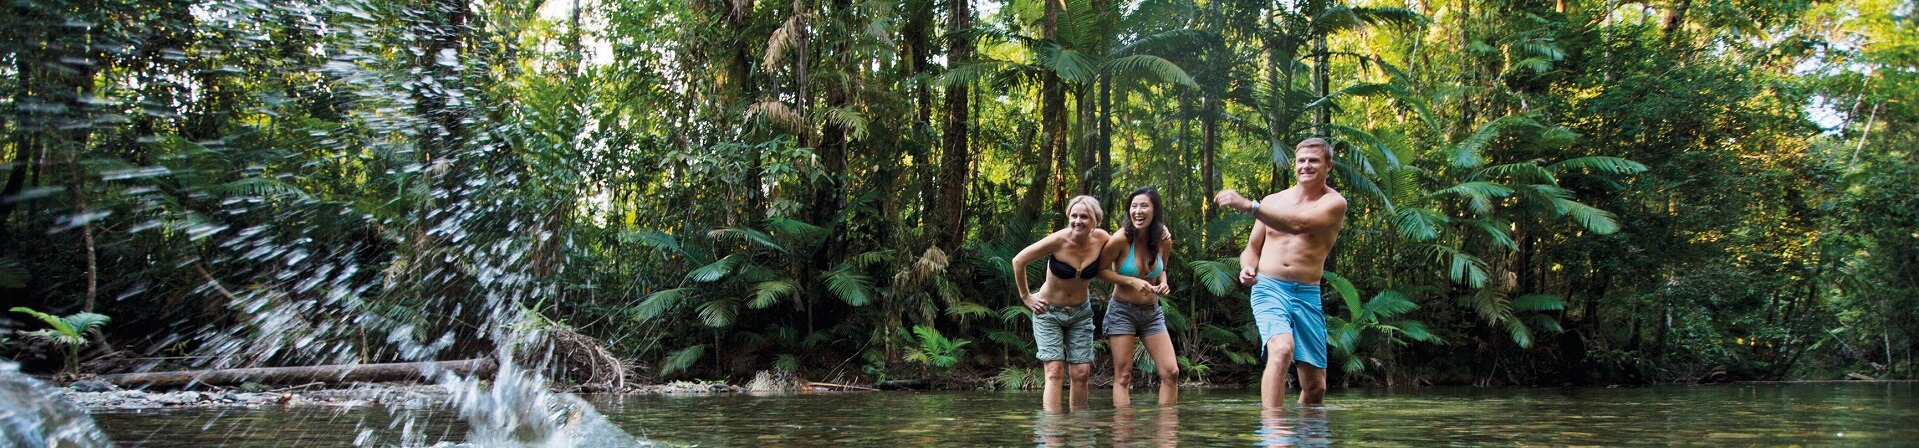 How many tourists visit the Daintree Rainforest each year?